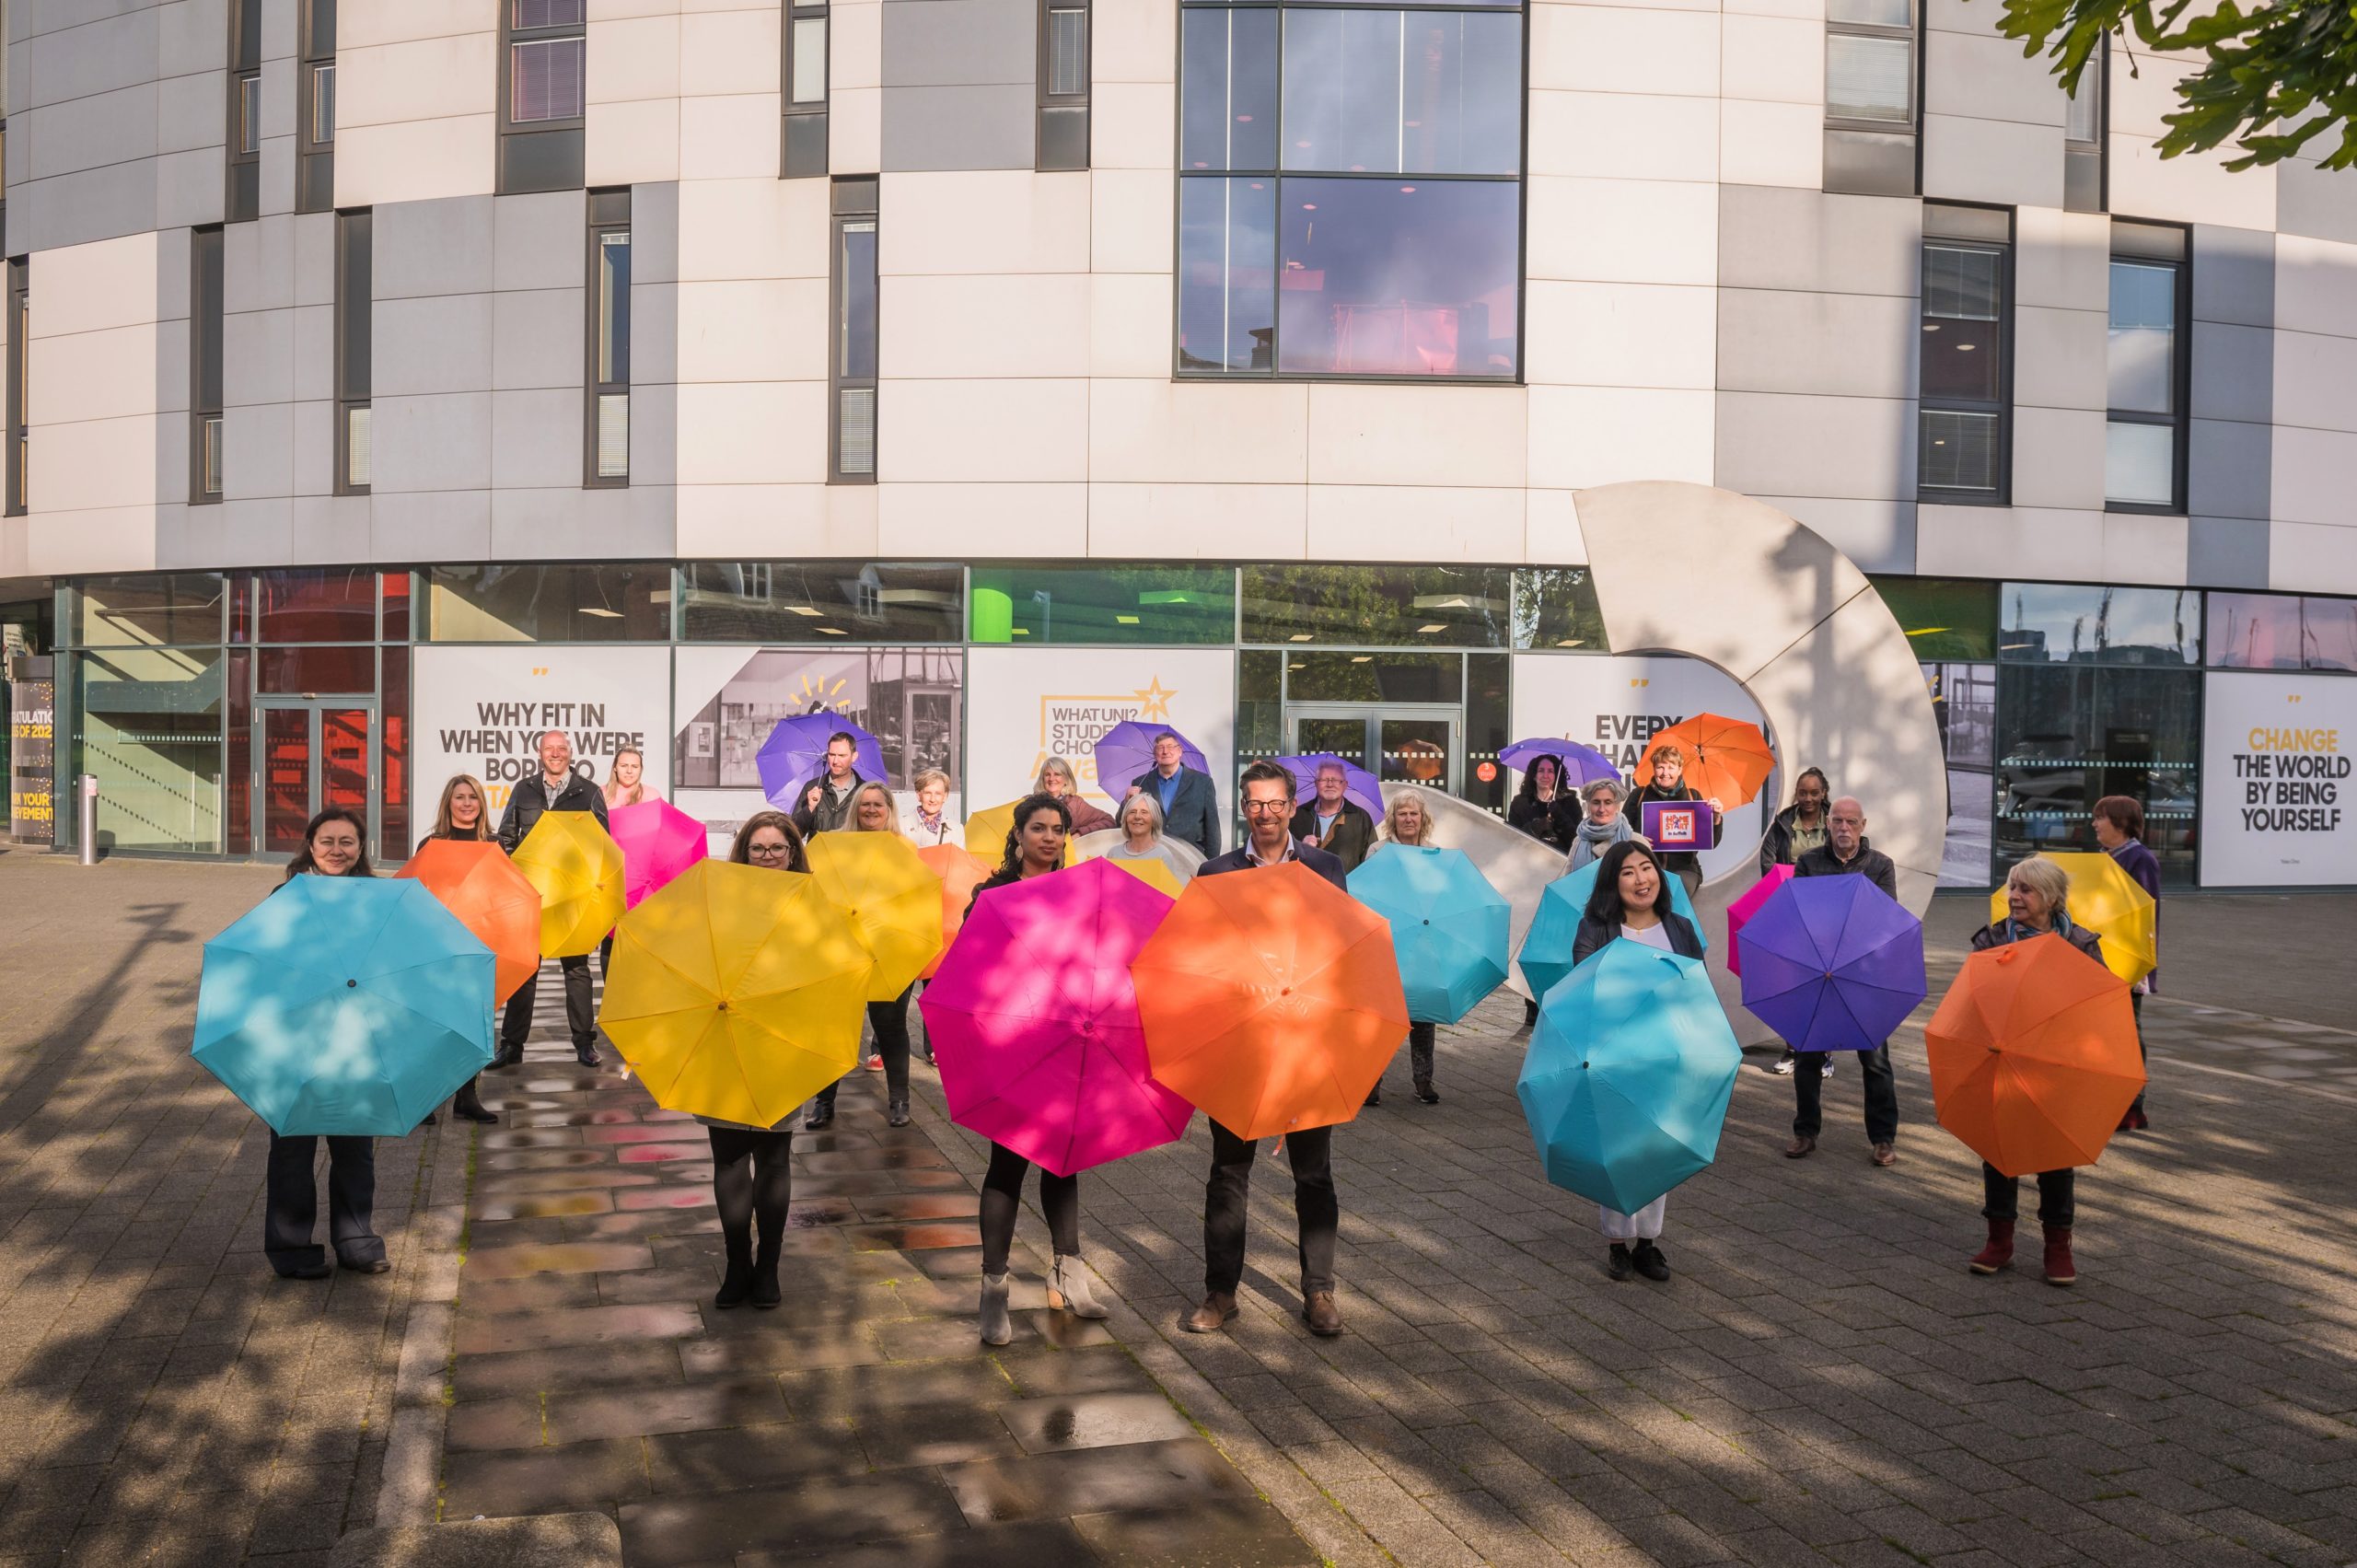 A group of people stood holding colourful umbrella's